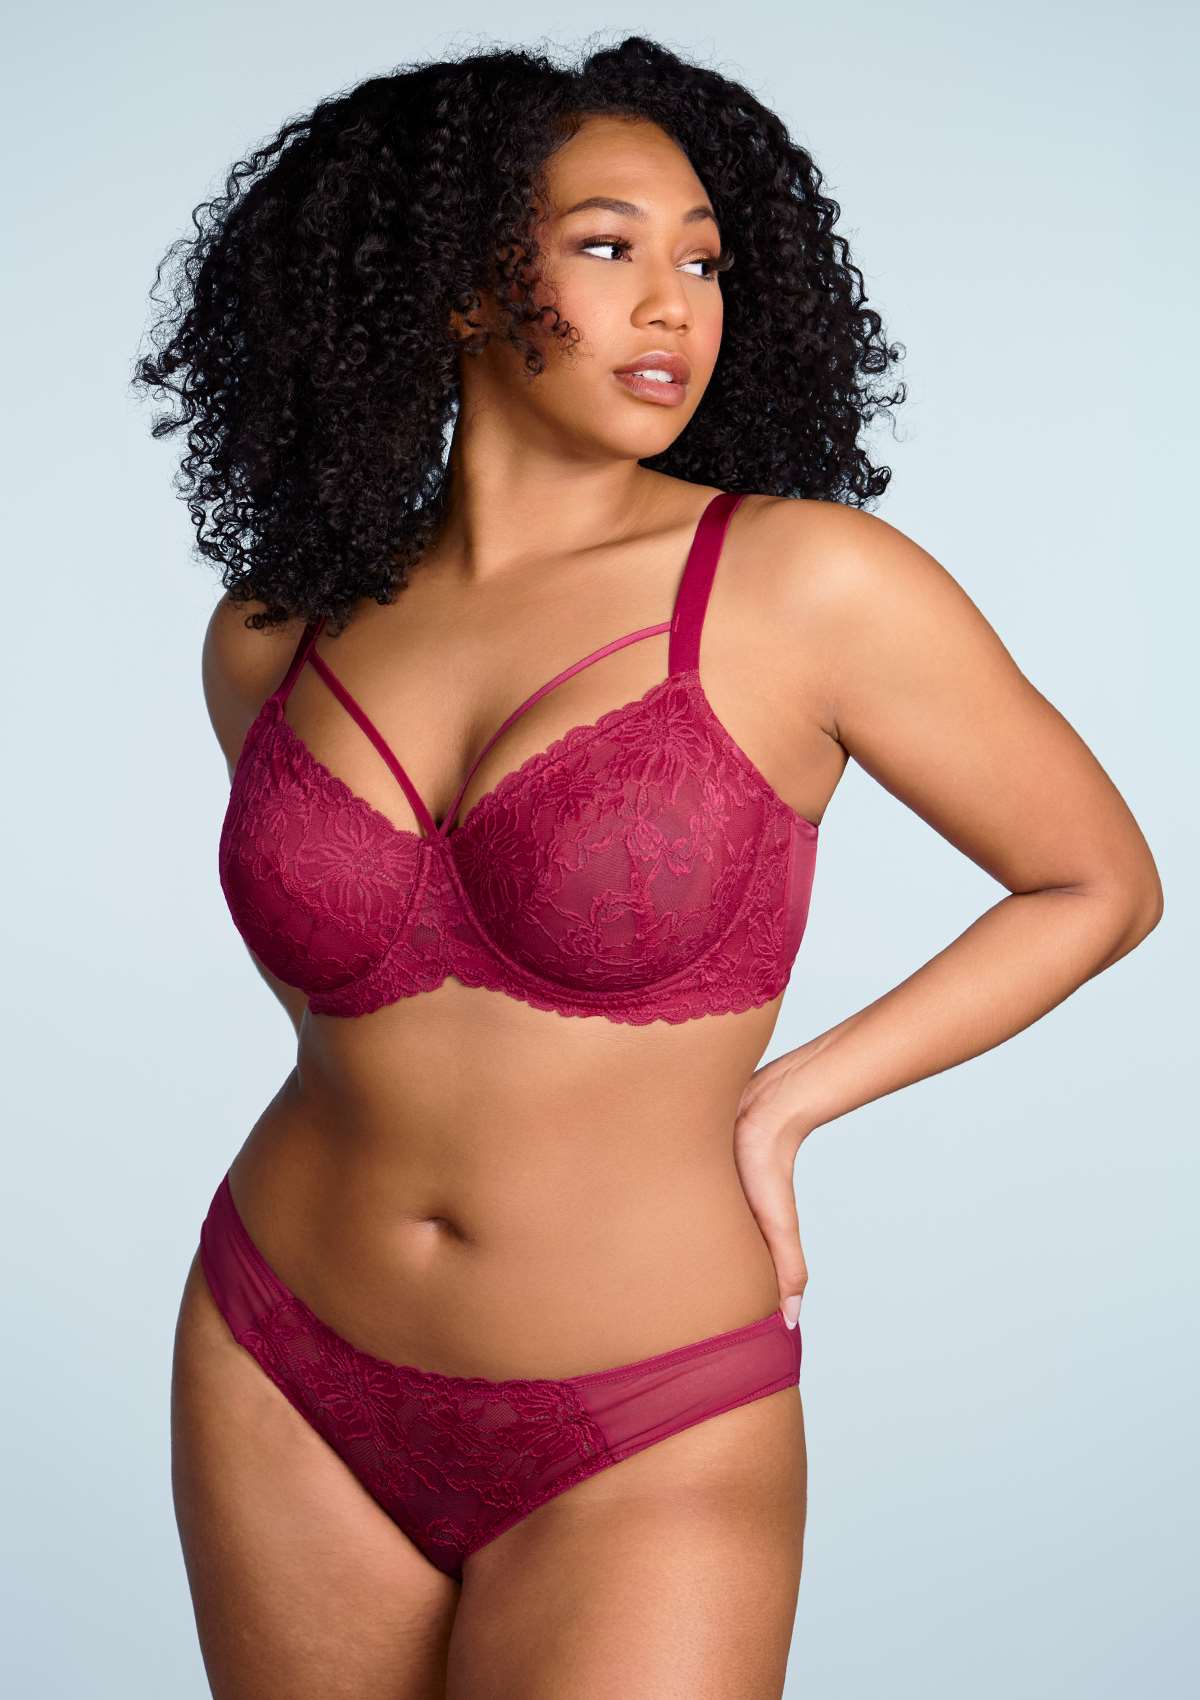 HSIA Pretty In Petals Lace Panties And Bra Set: Plus Size Women Bra - Red / 36 / B